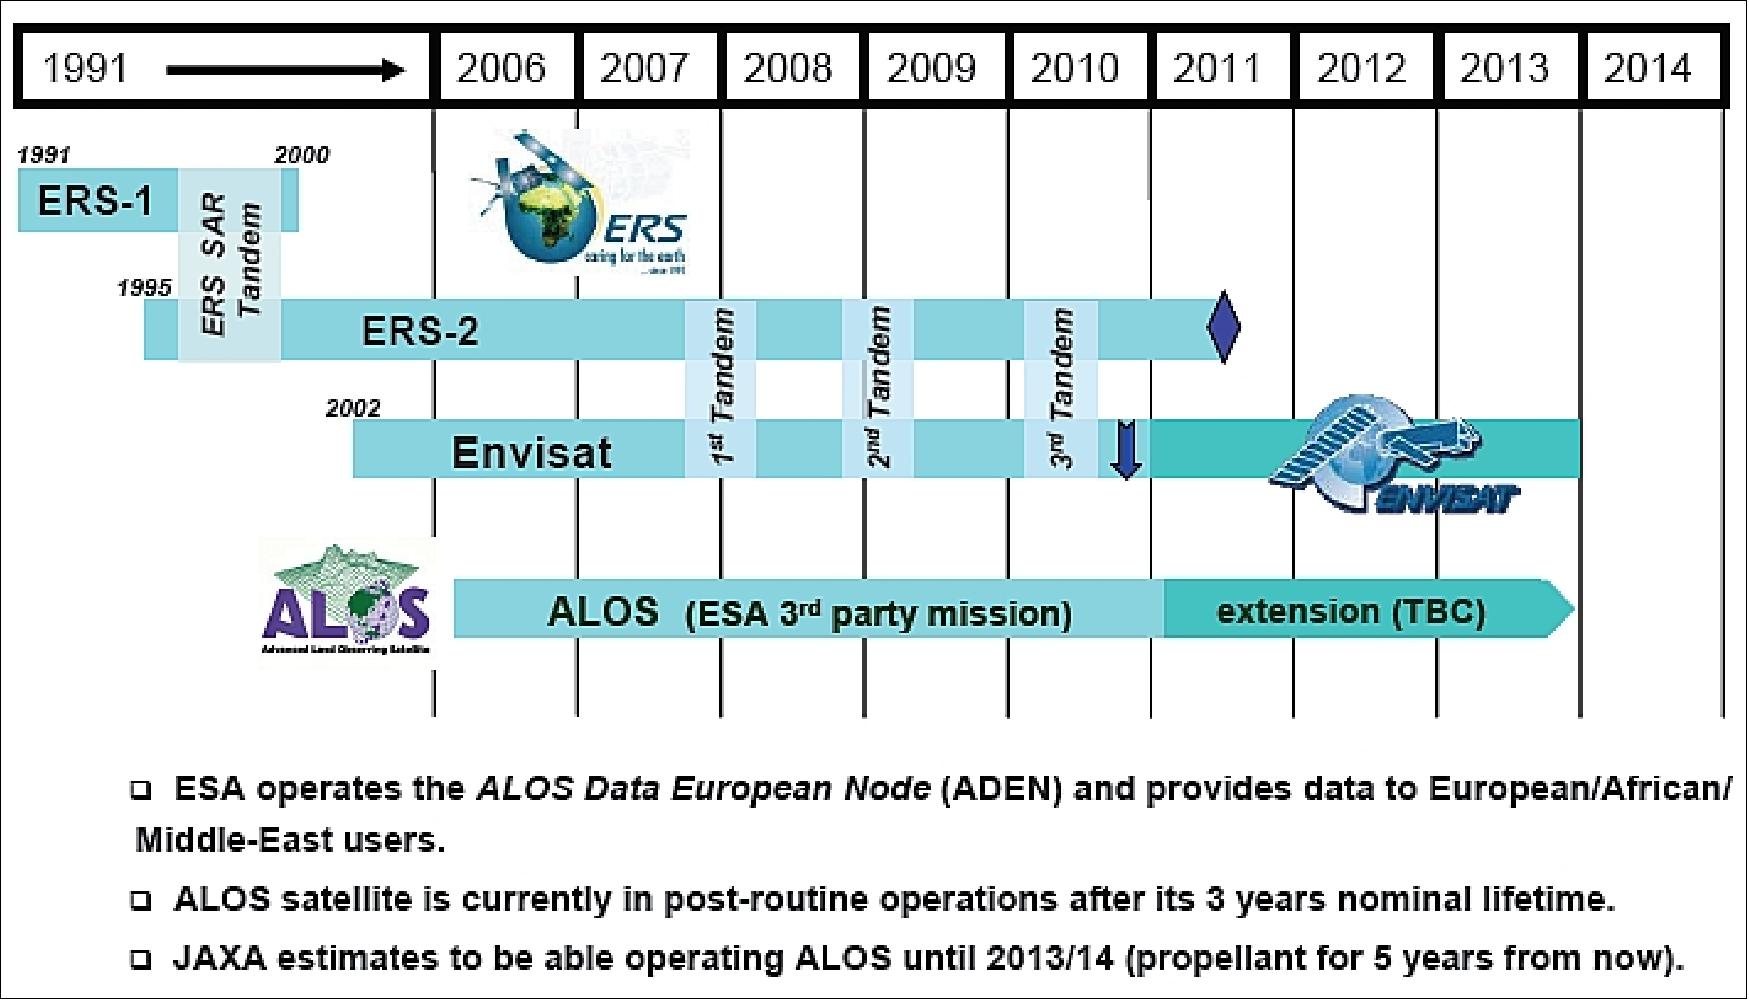 Figure 29: SAR interferometry with ERS and Envisat Tandem missions - and ALOS as ESA's 3rd party mission (Ref. 50)